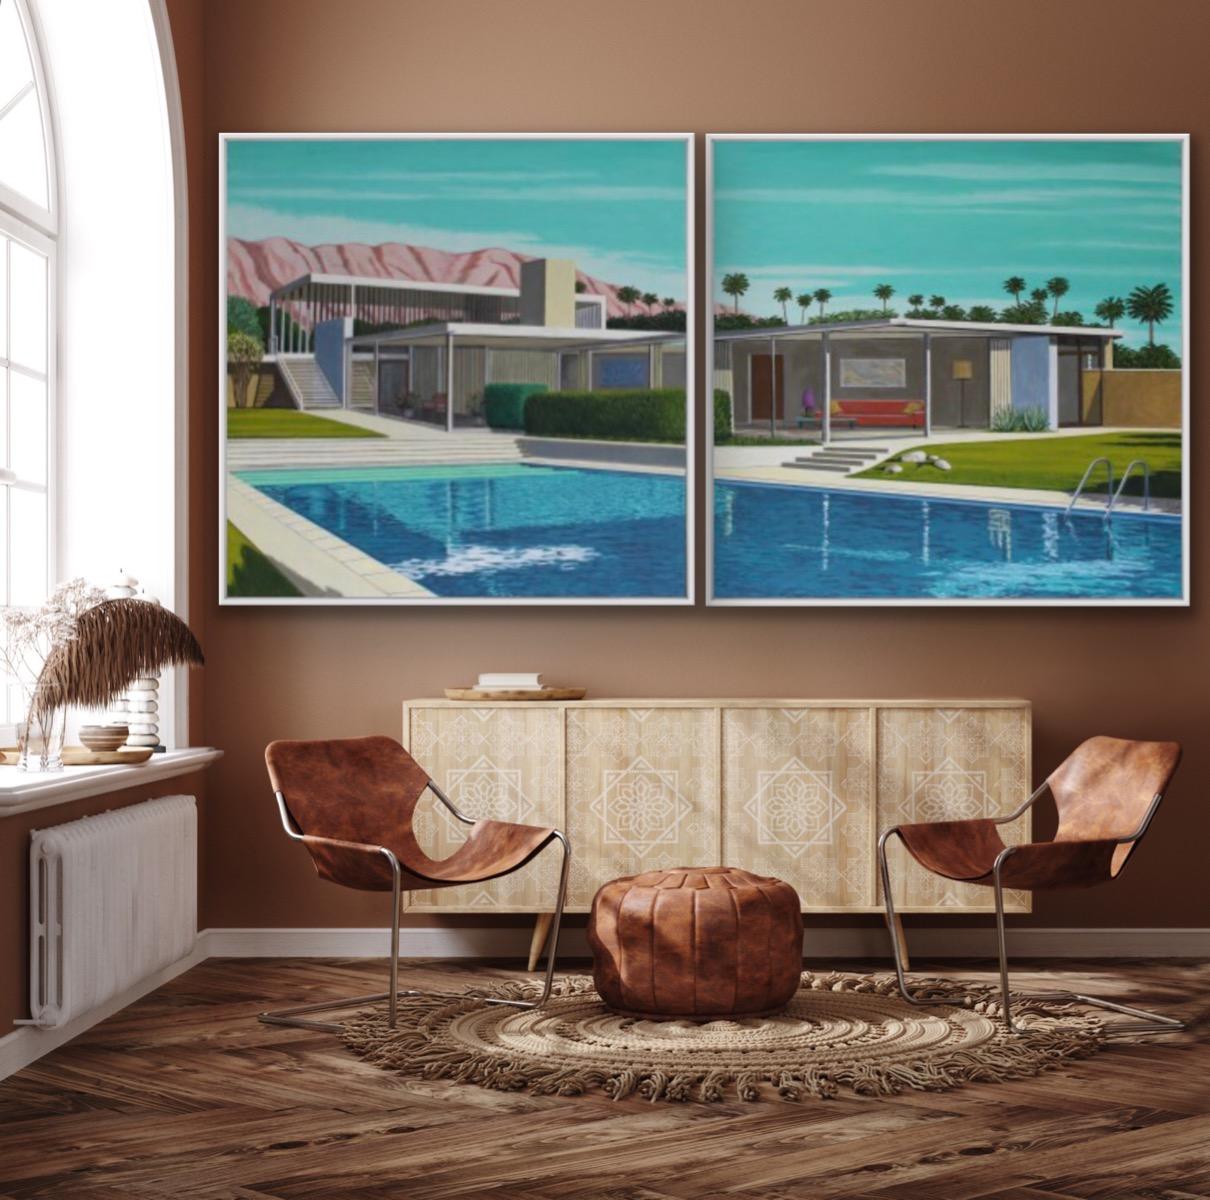 This is an oil painting of the iconic house in California designed by the famous architect Richard Neutra. I love to paint this house from many different angles and always focusing on the beautiful swimming pool and the impressive mountains behind